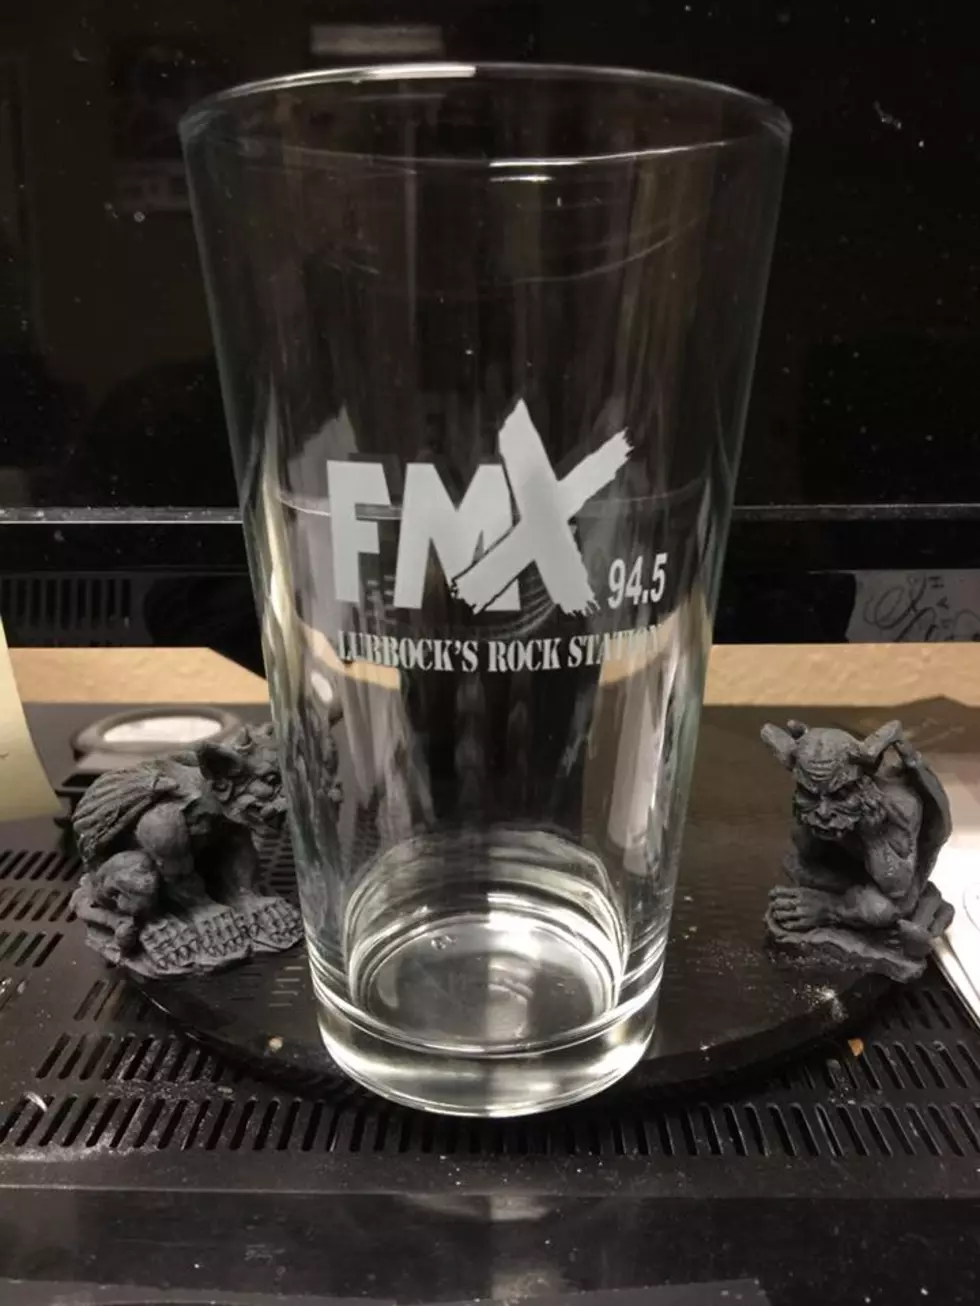 Have You Seen The New FMX Pint Glasses?